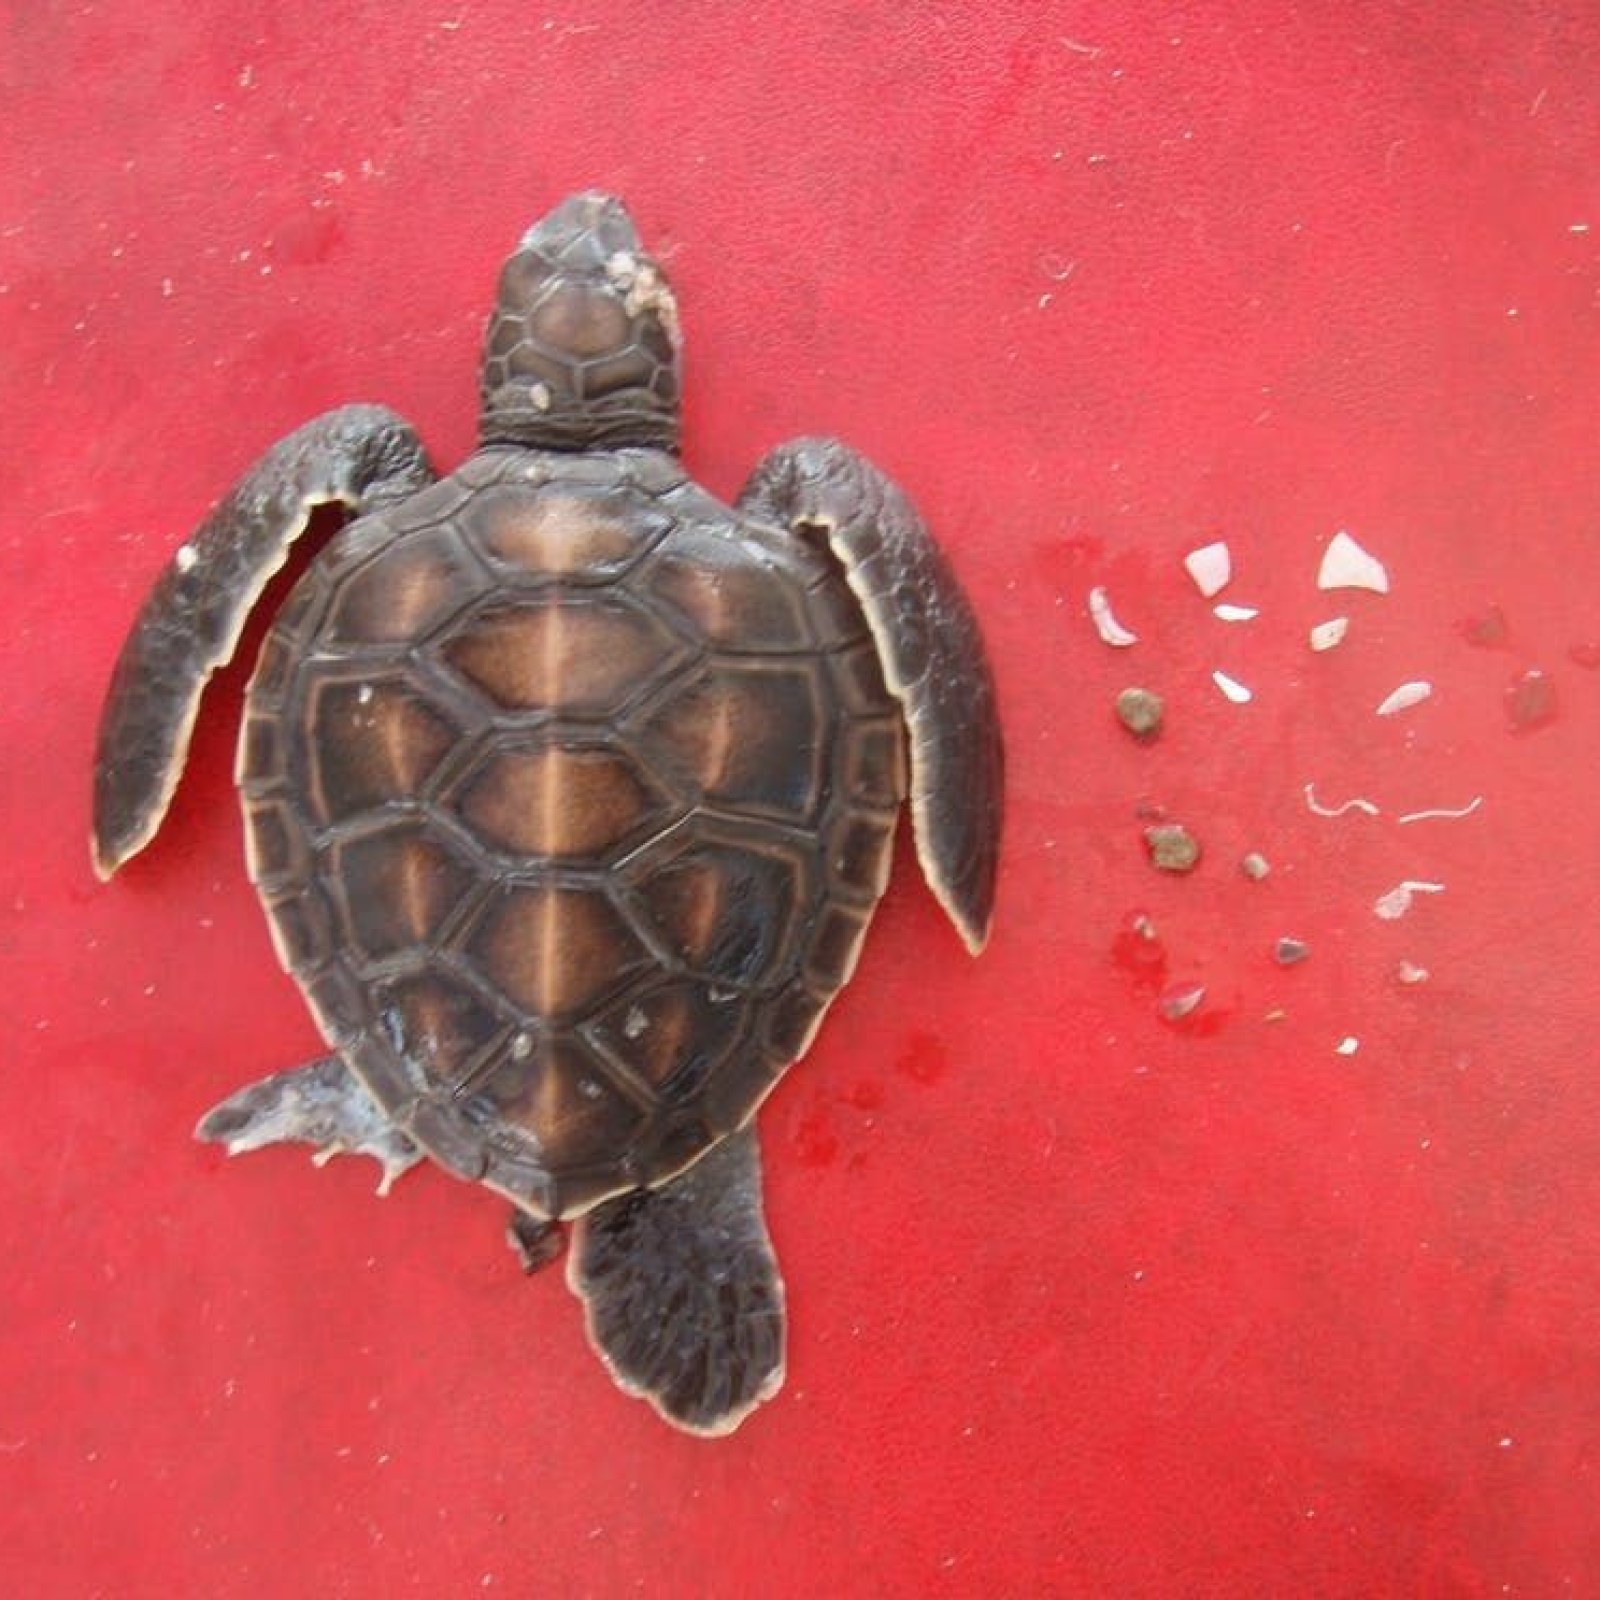 It Only Takes This Much Plastic Pollution to Kill a Turtle